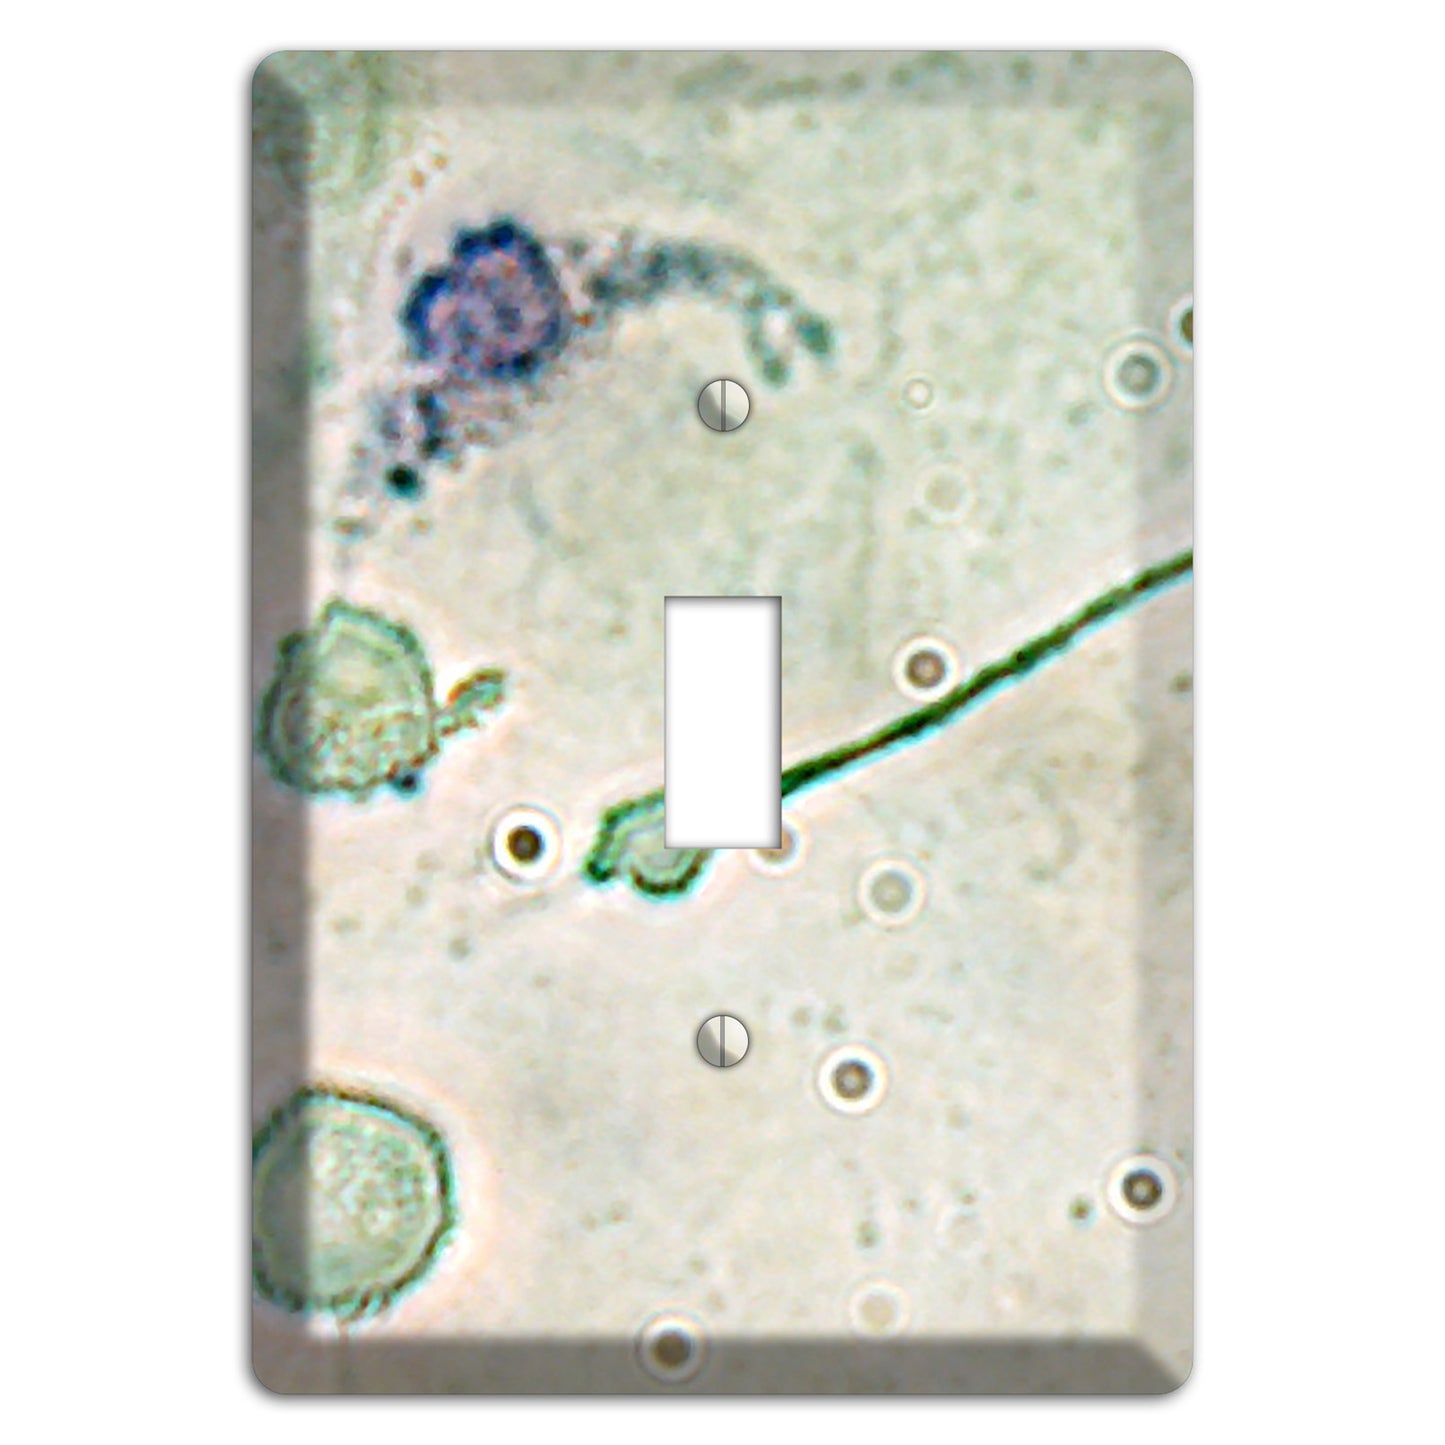 Macrophage Cover Plates